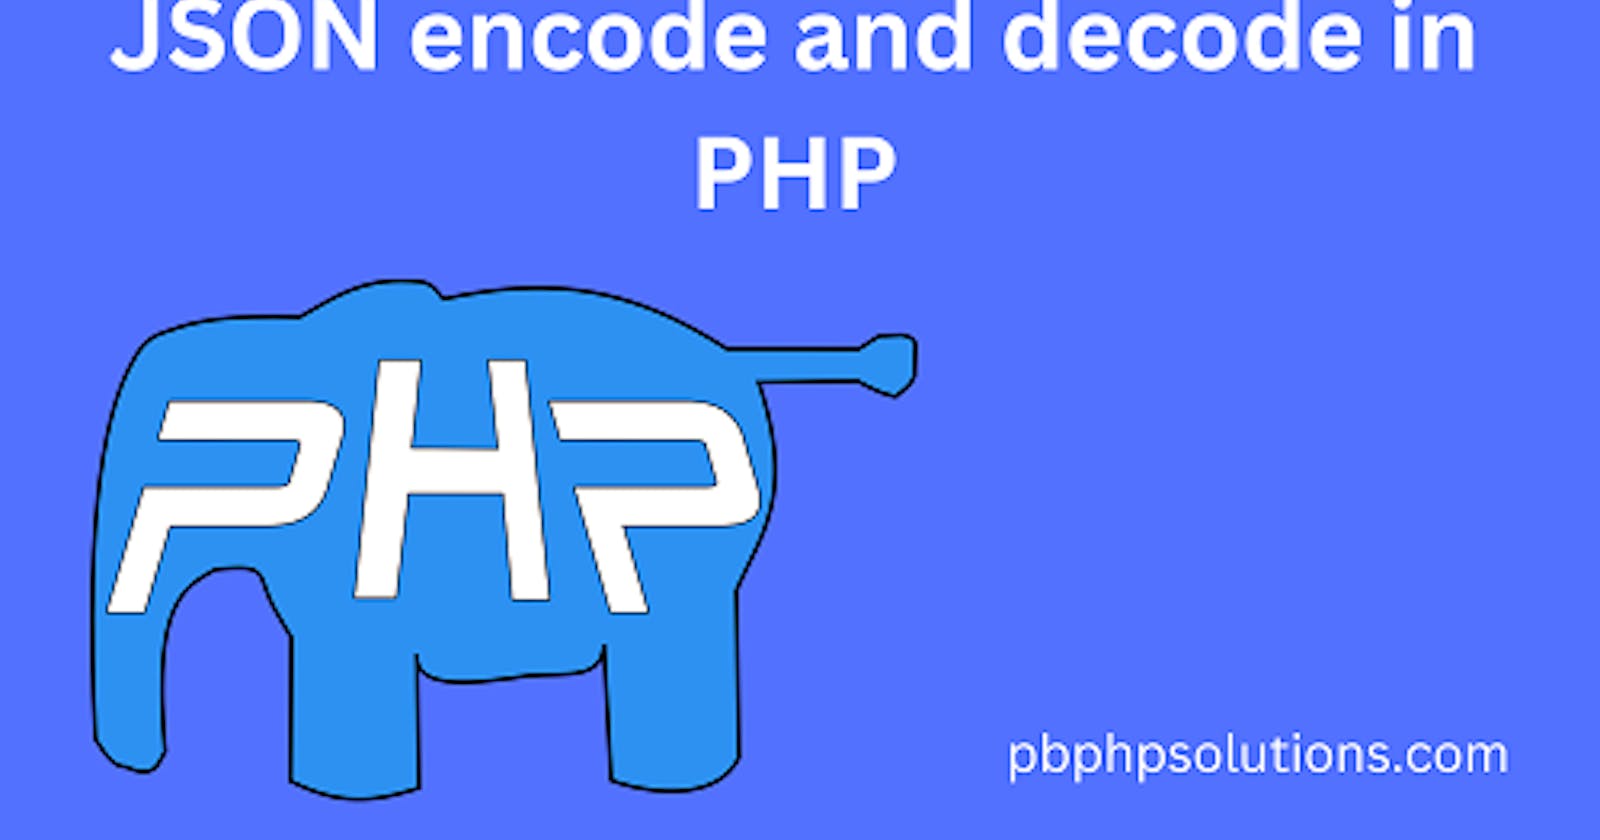 JSON encode and decode in PHP